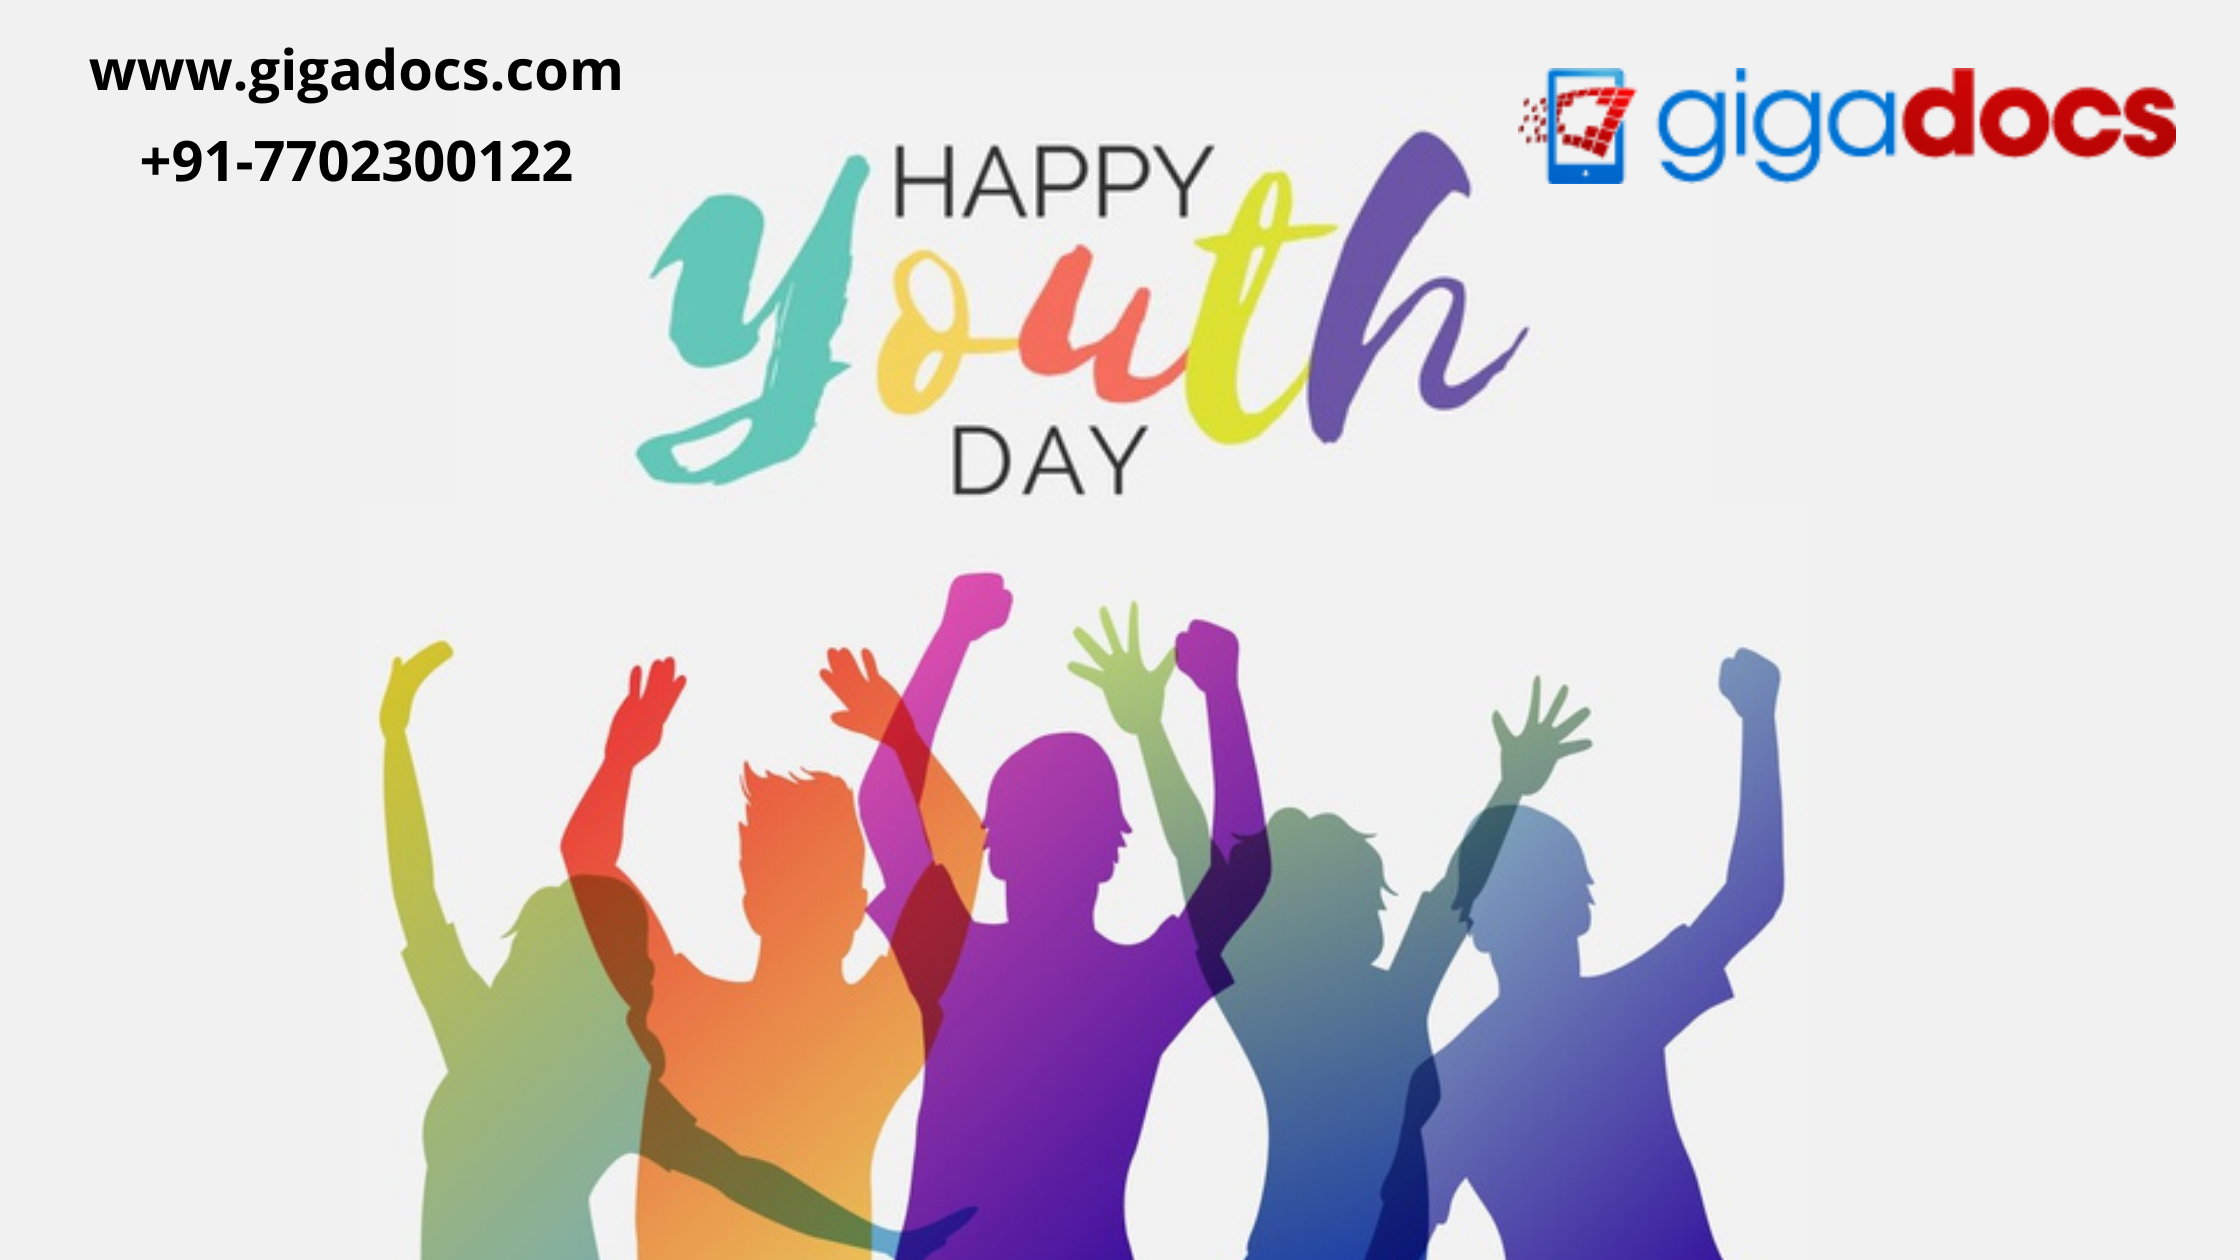 Celebrating Youth empowerment this National Youth Day